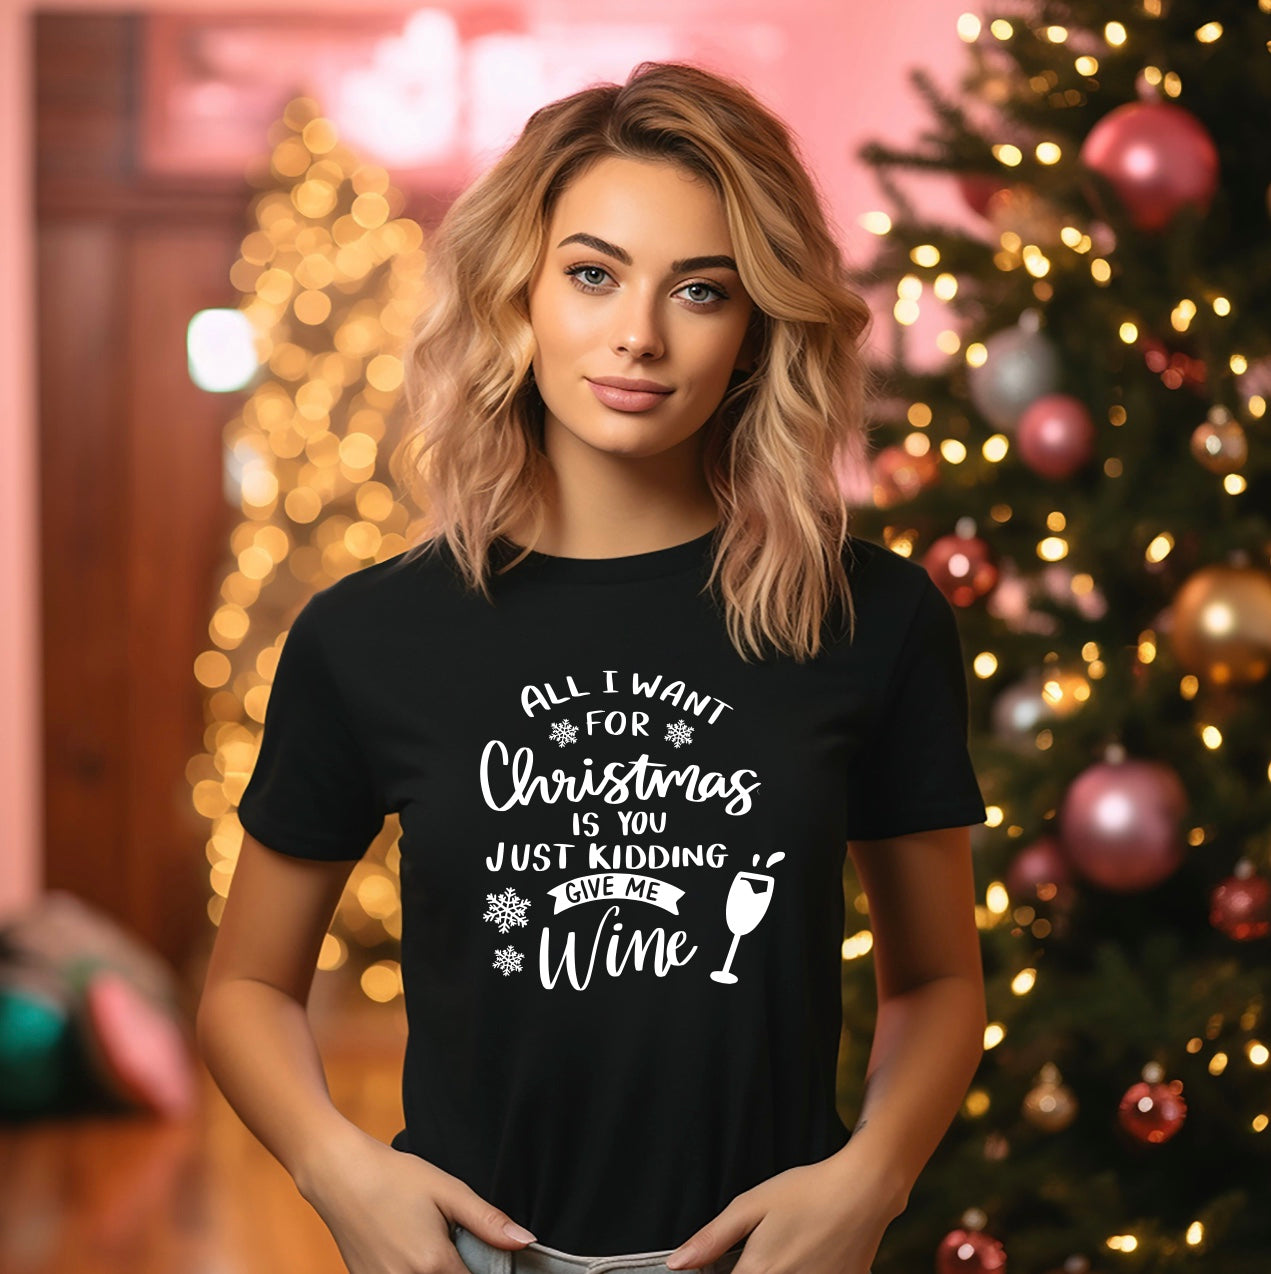 All I want for Christmas is you just kidding give me wine t-shirt In black